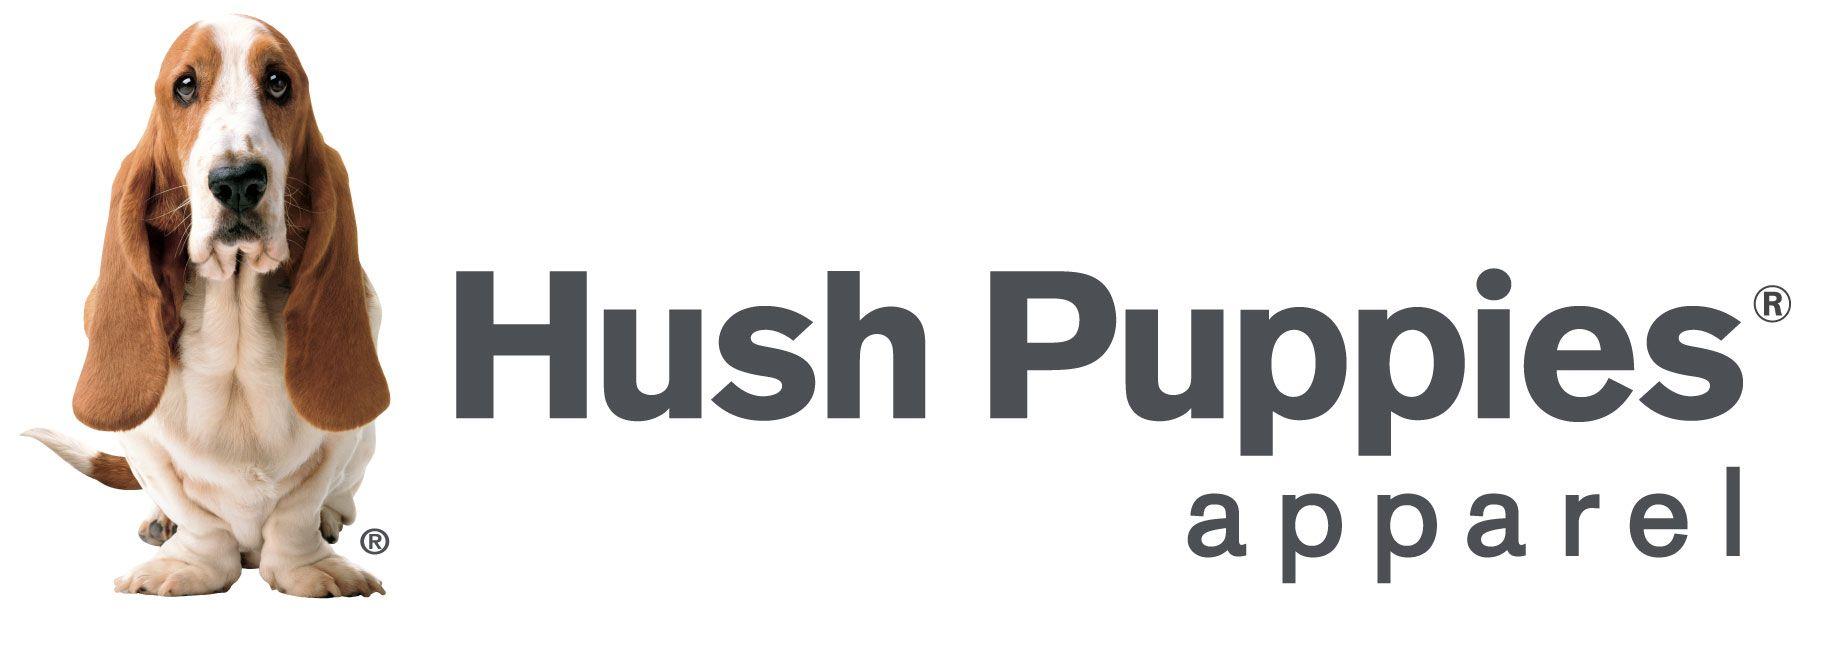 Shoes and Apparel Logo - Hush Puppies